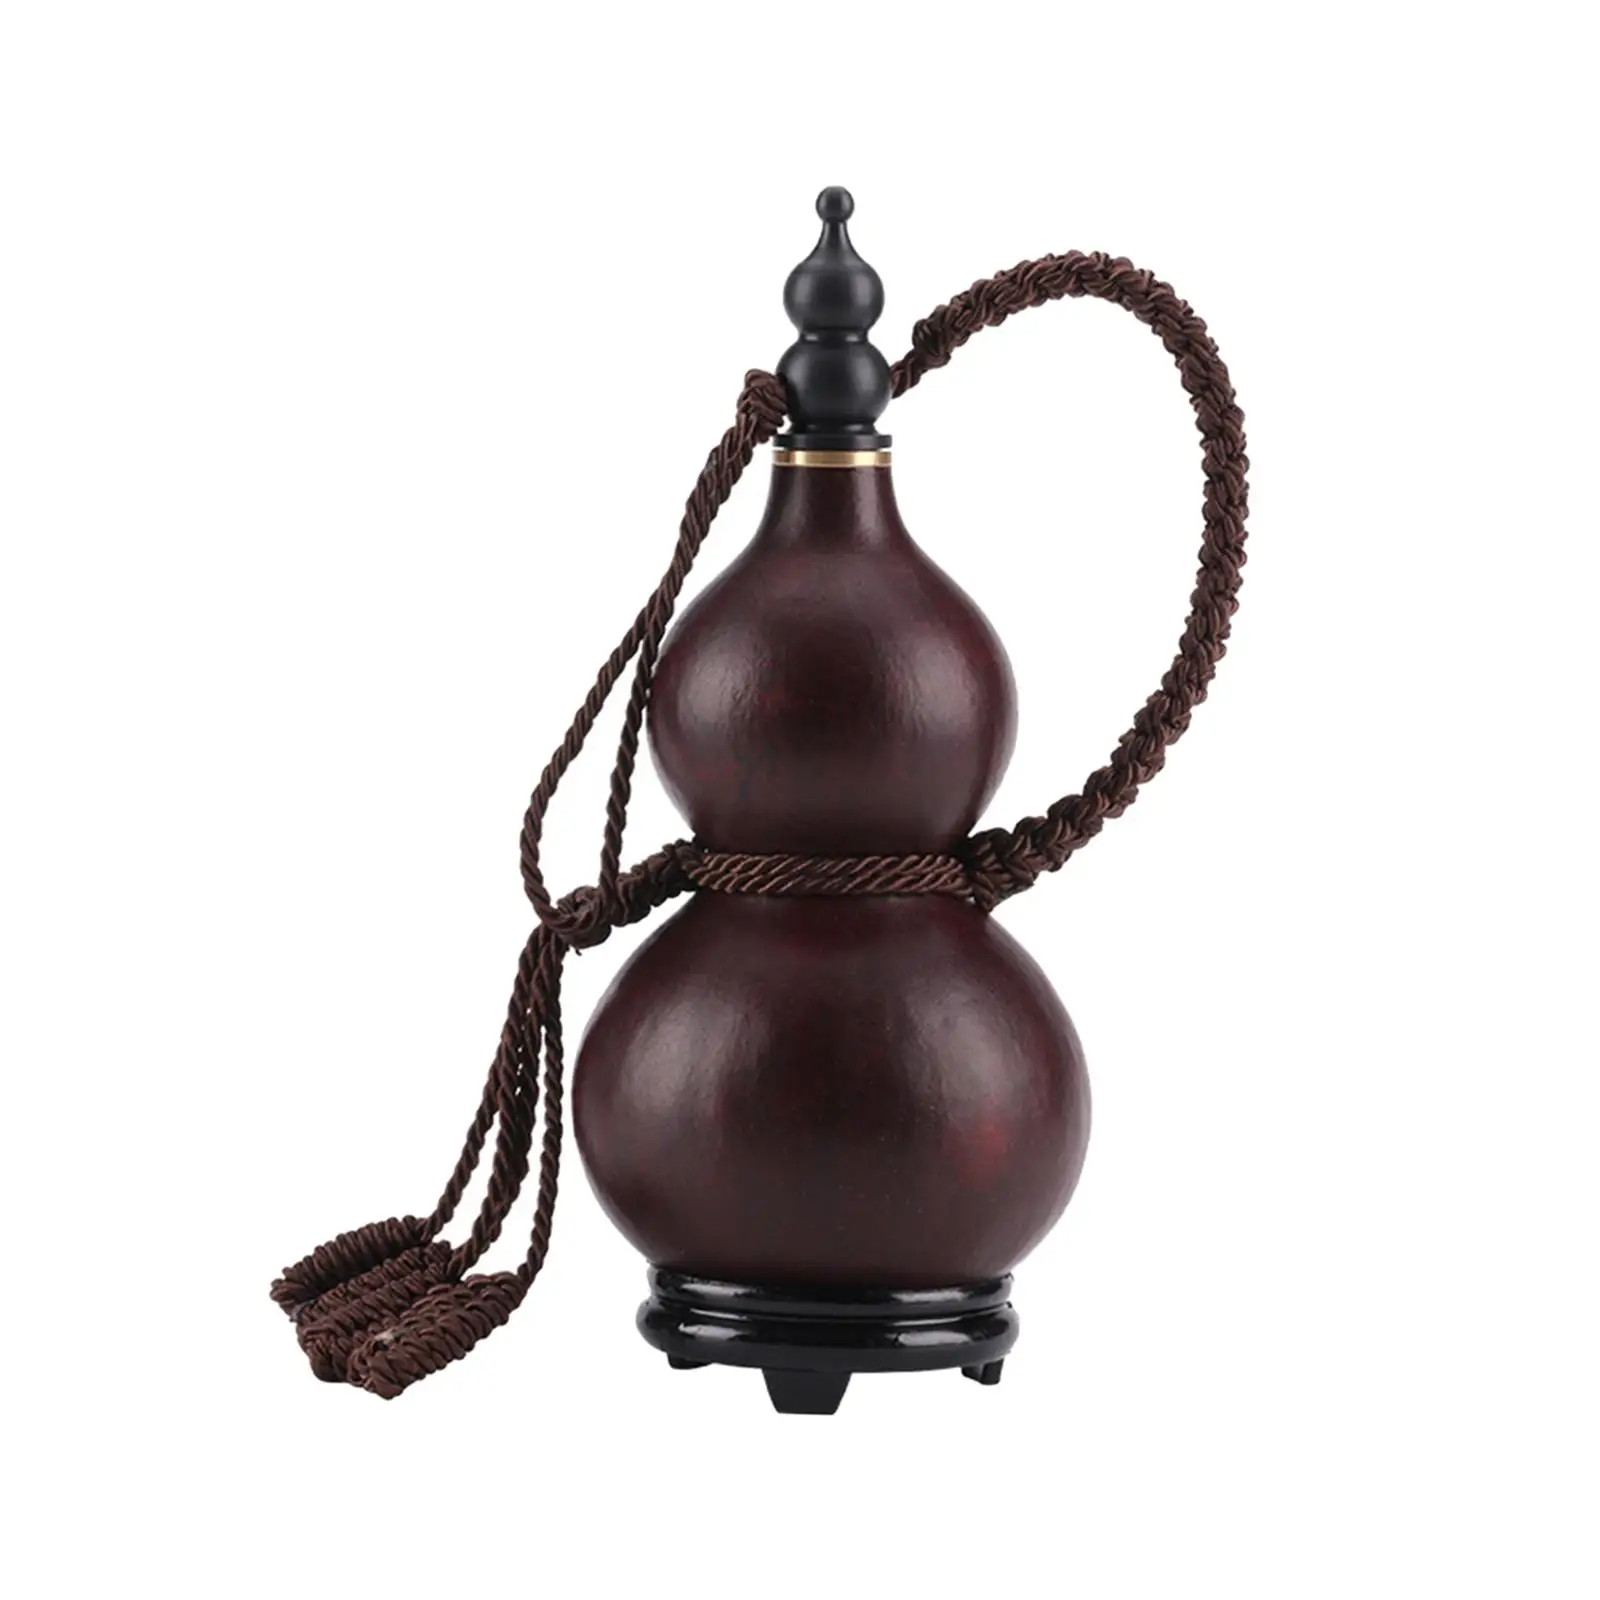 Traditional Gourd Wine Bottle Hollow Calabash with Lid Wine Gourd Portable for Camping drinks Holder Ornament